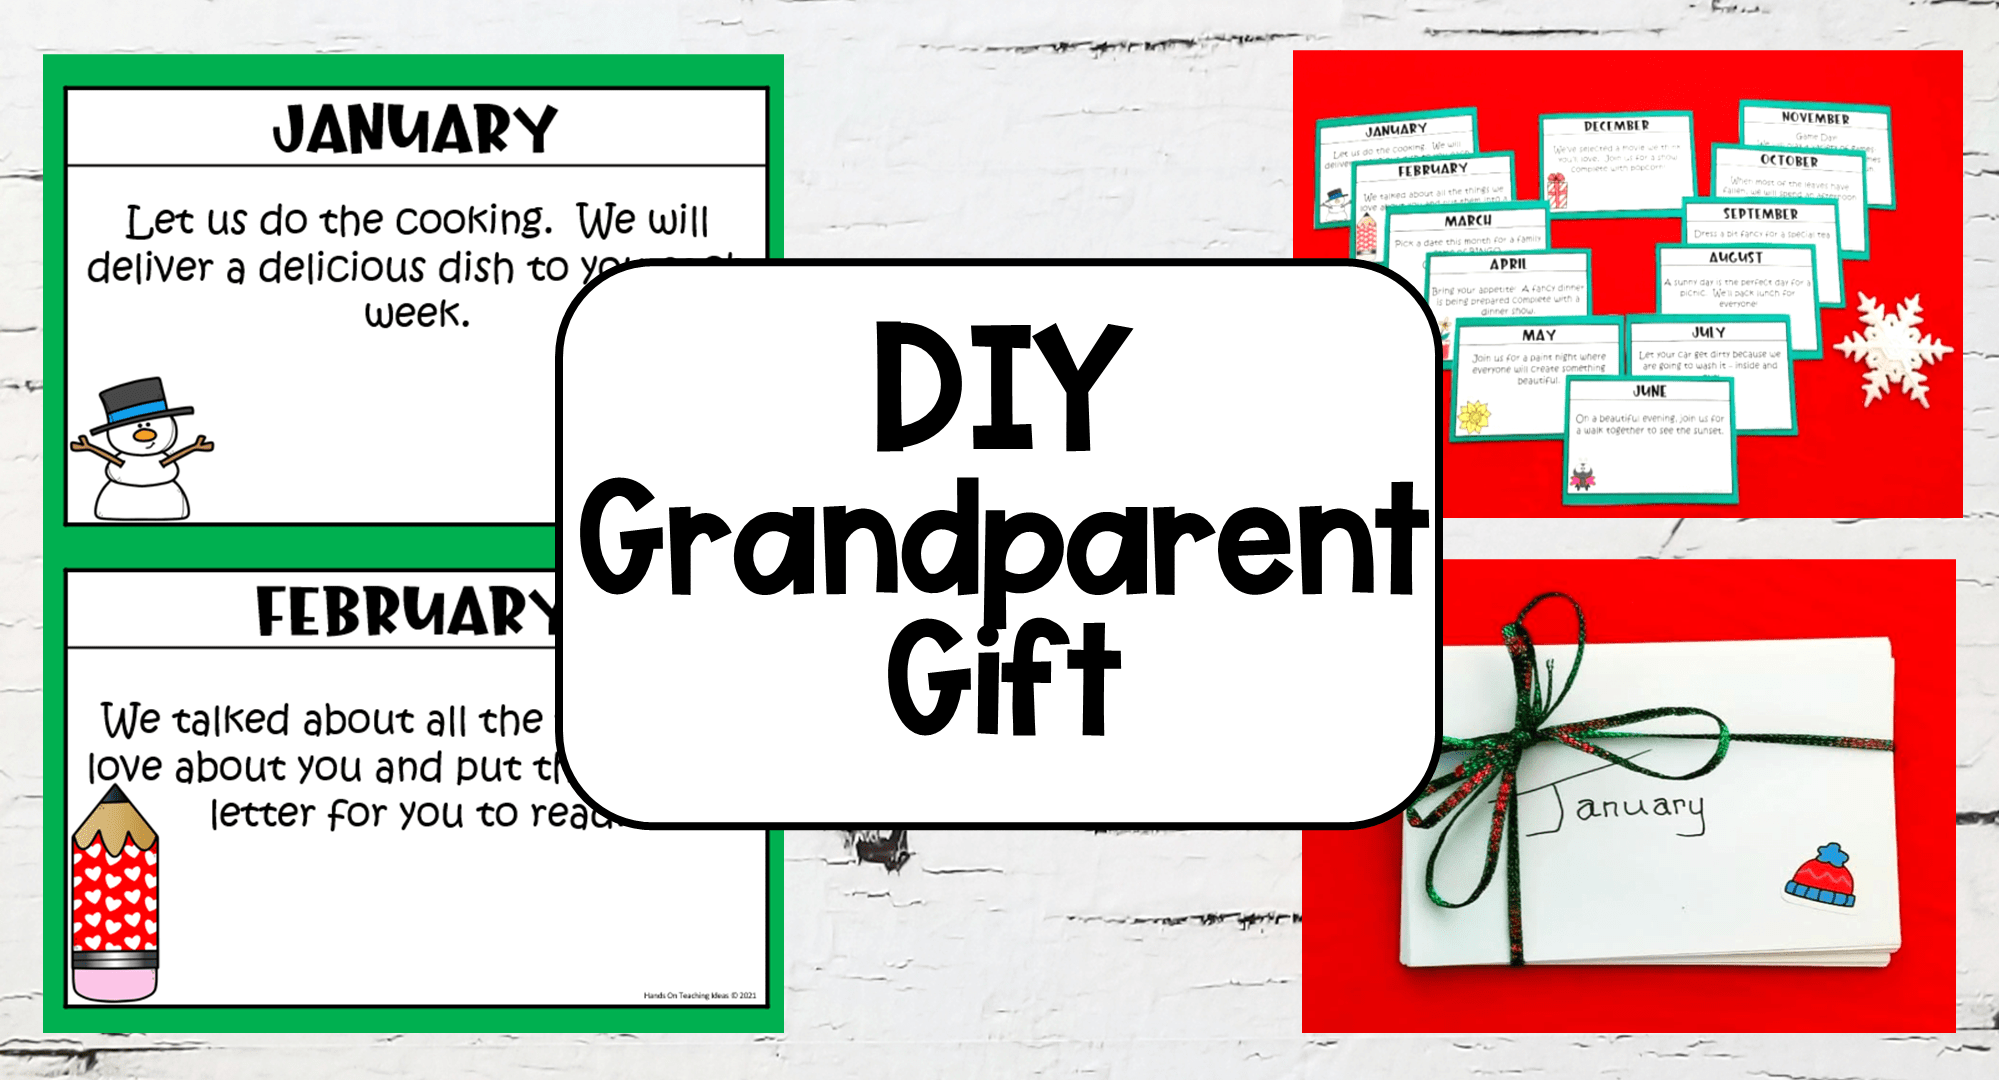 Easy Crafts Make Great Gifts for Grandparents - WubbaNub